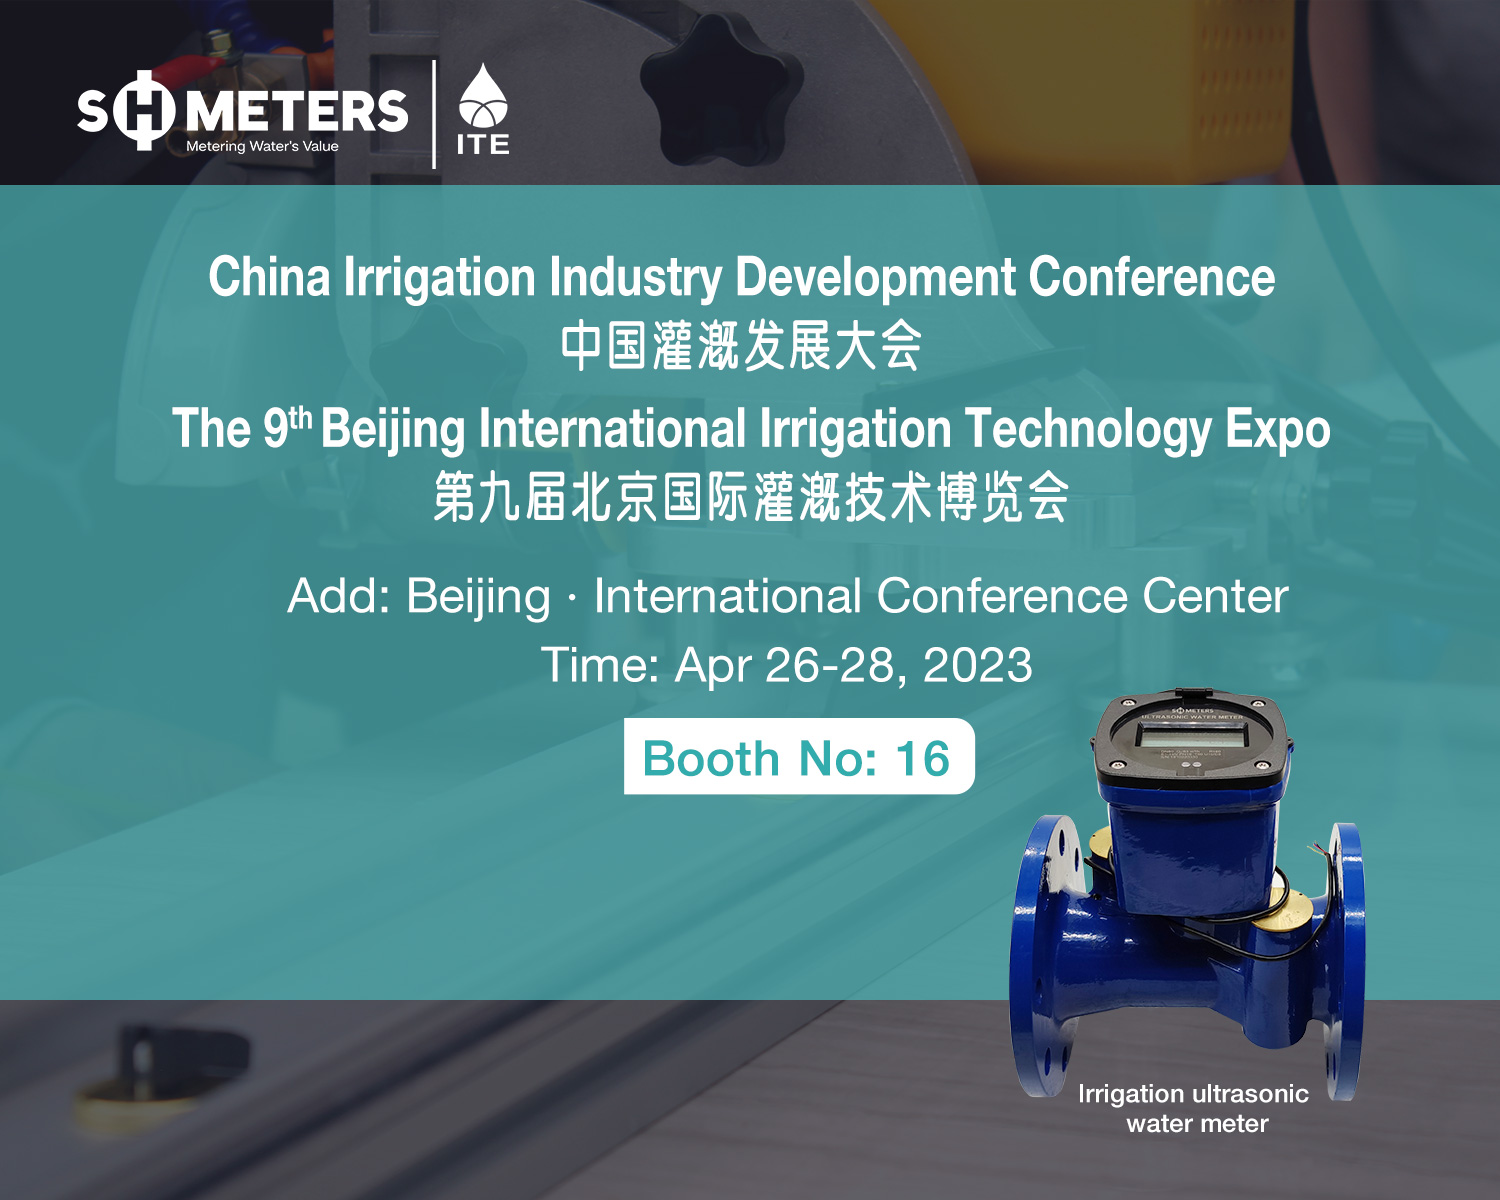 S.H.Meters is waiting for you at the 9th Beijing International Smart Agriculture and Irrigation Technology Expo!